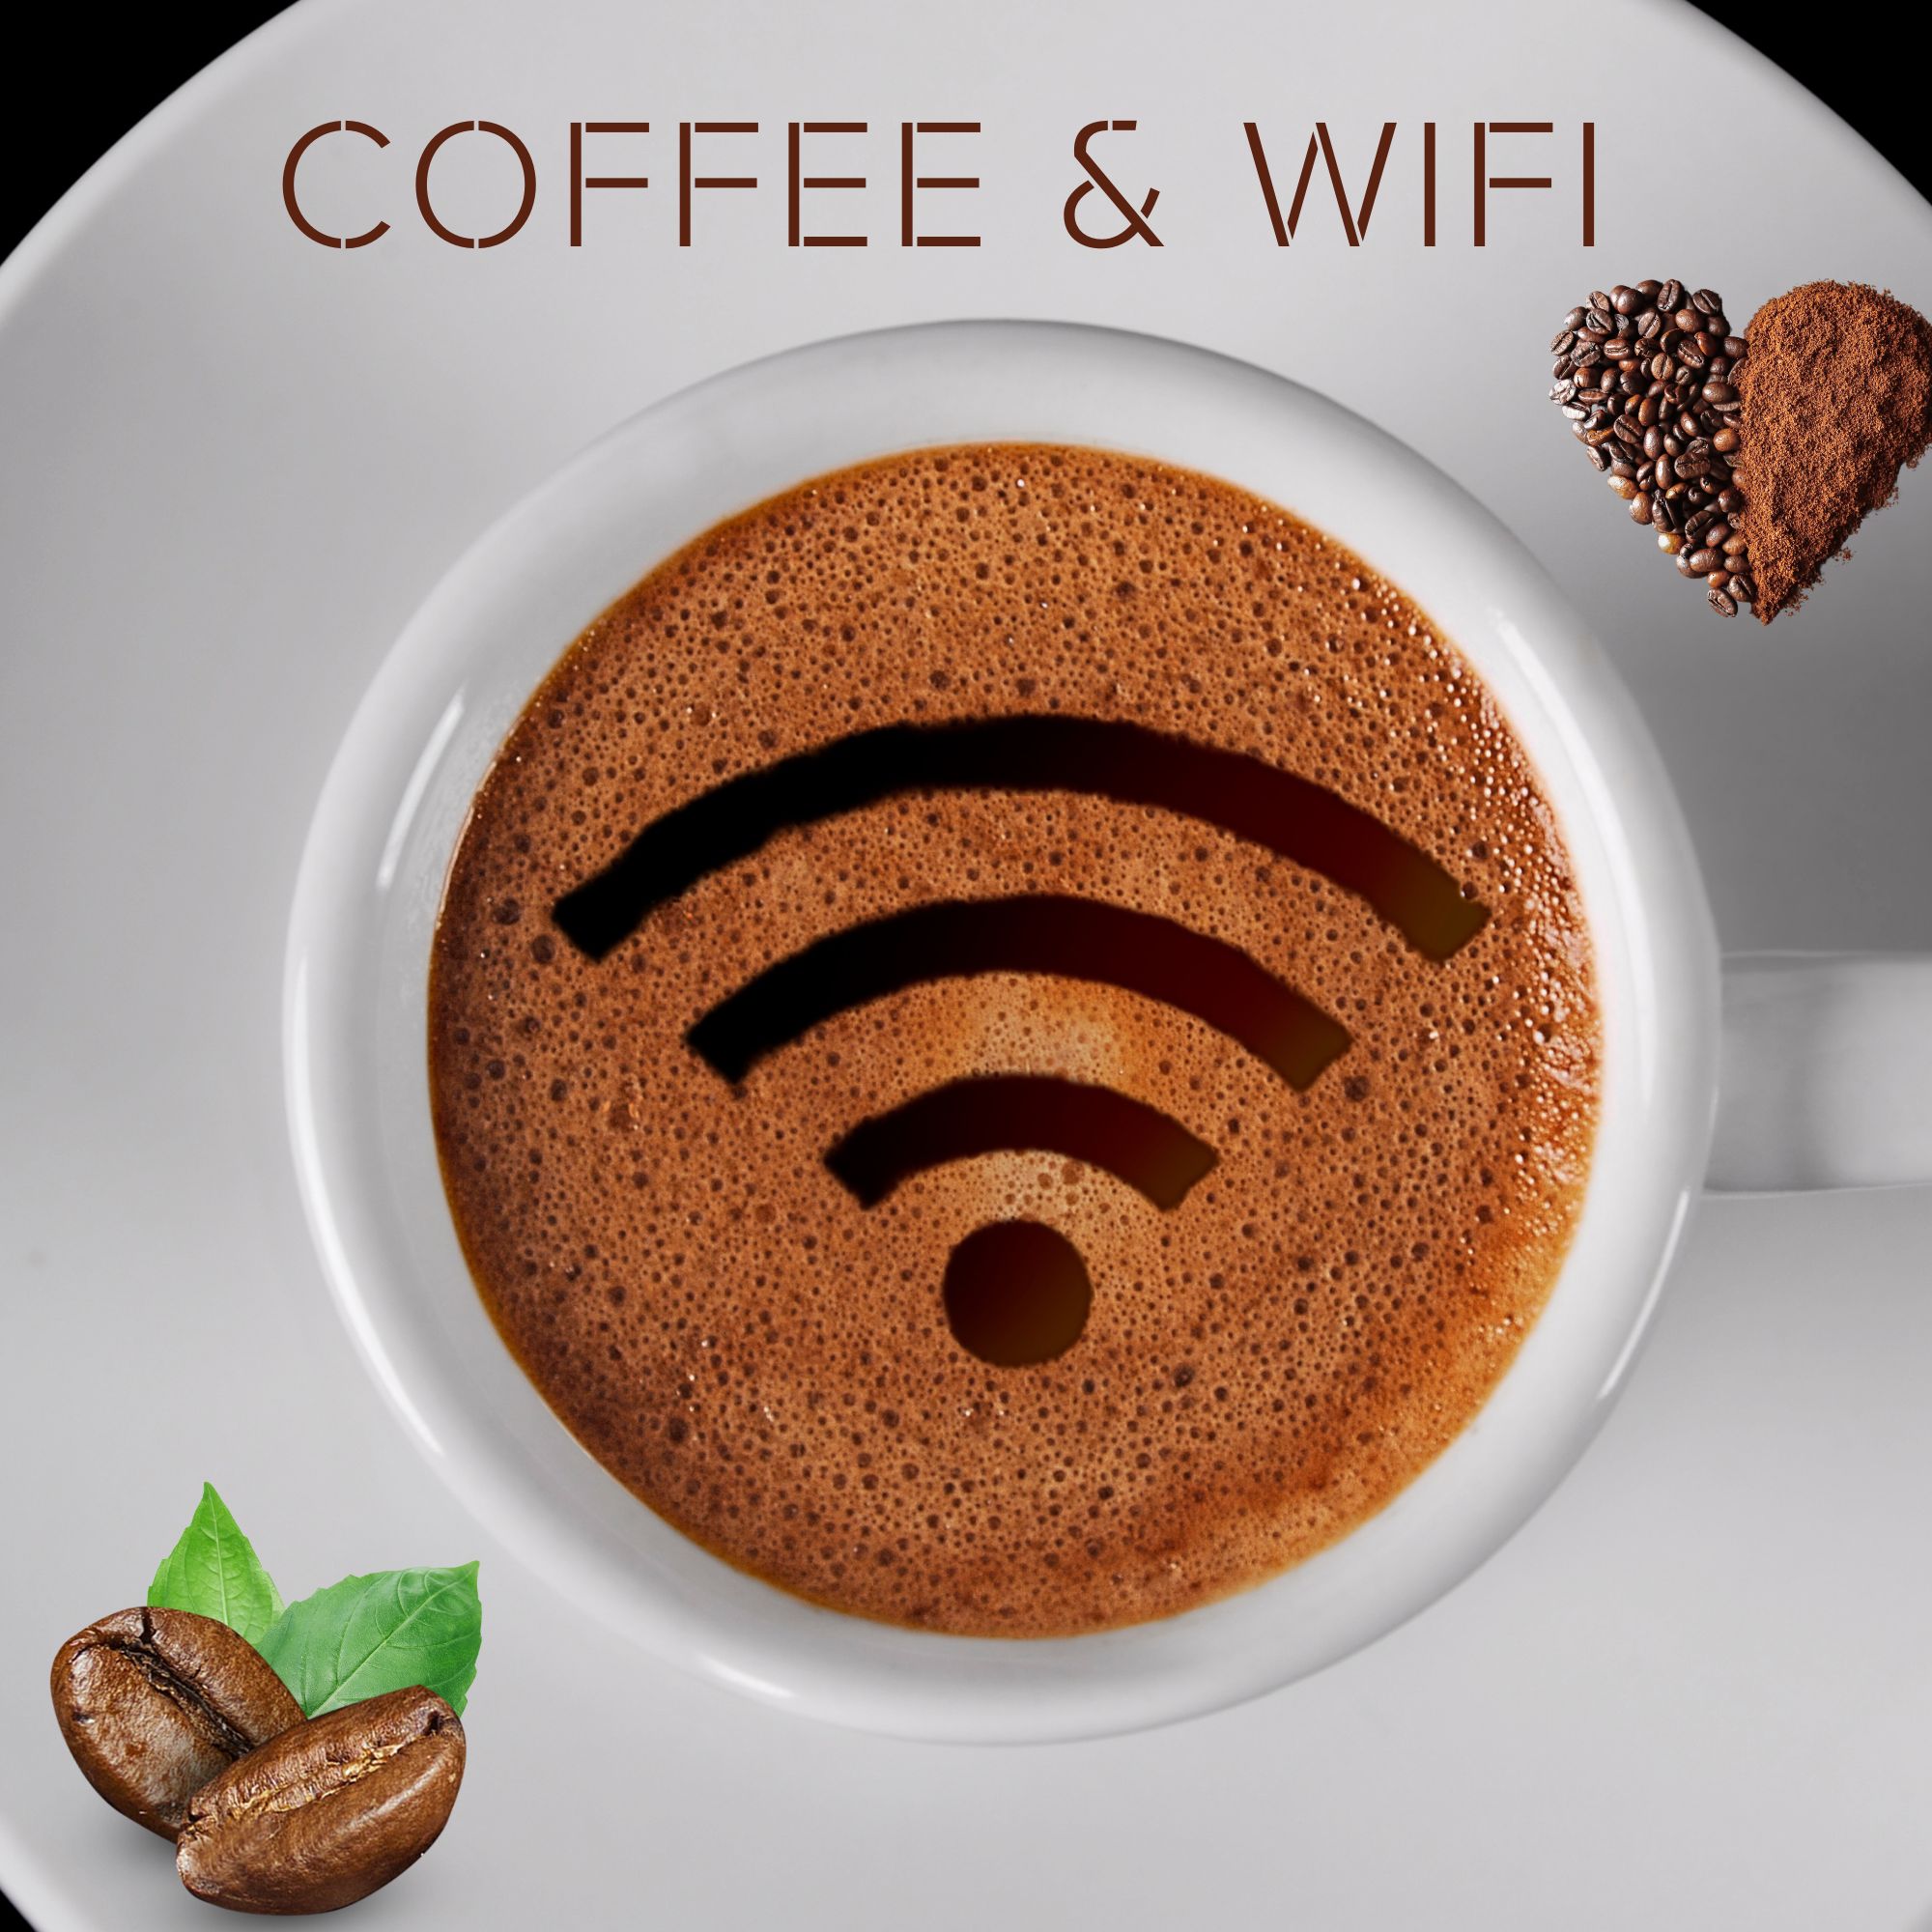 Cup of Coffee with Wifi icon in the foam, on a saucer with coffee beans in a heart shape